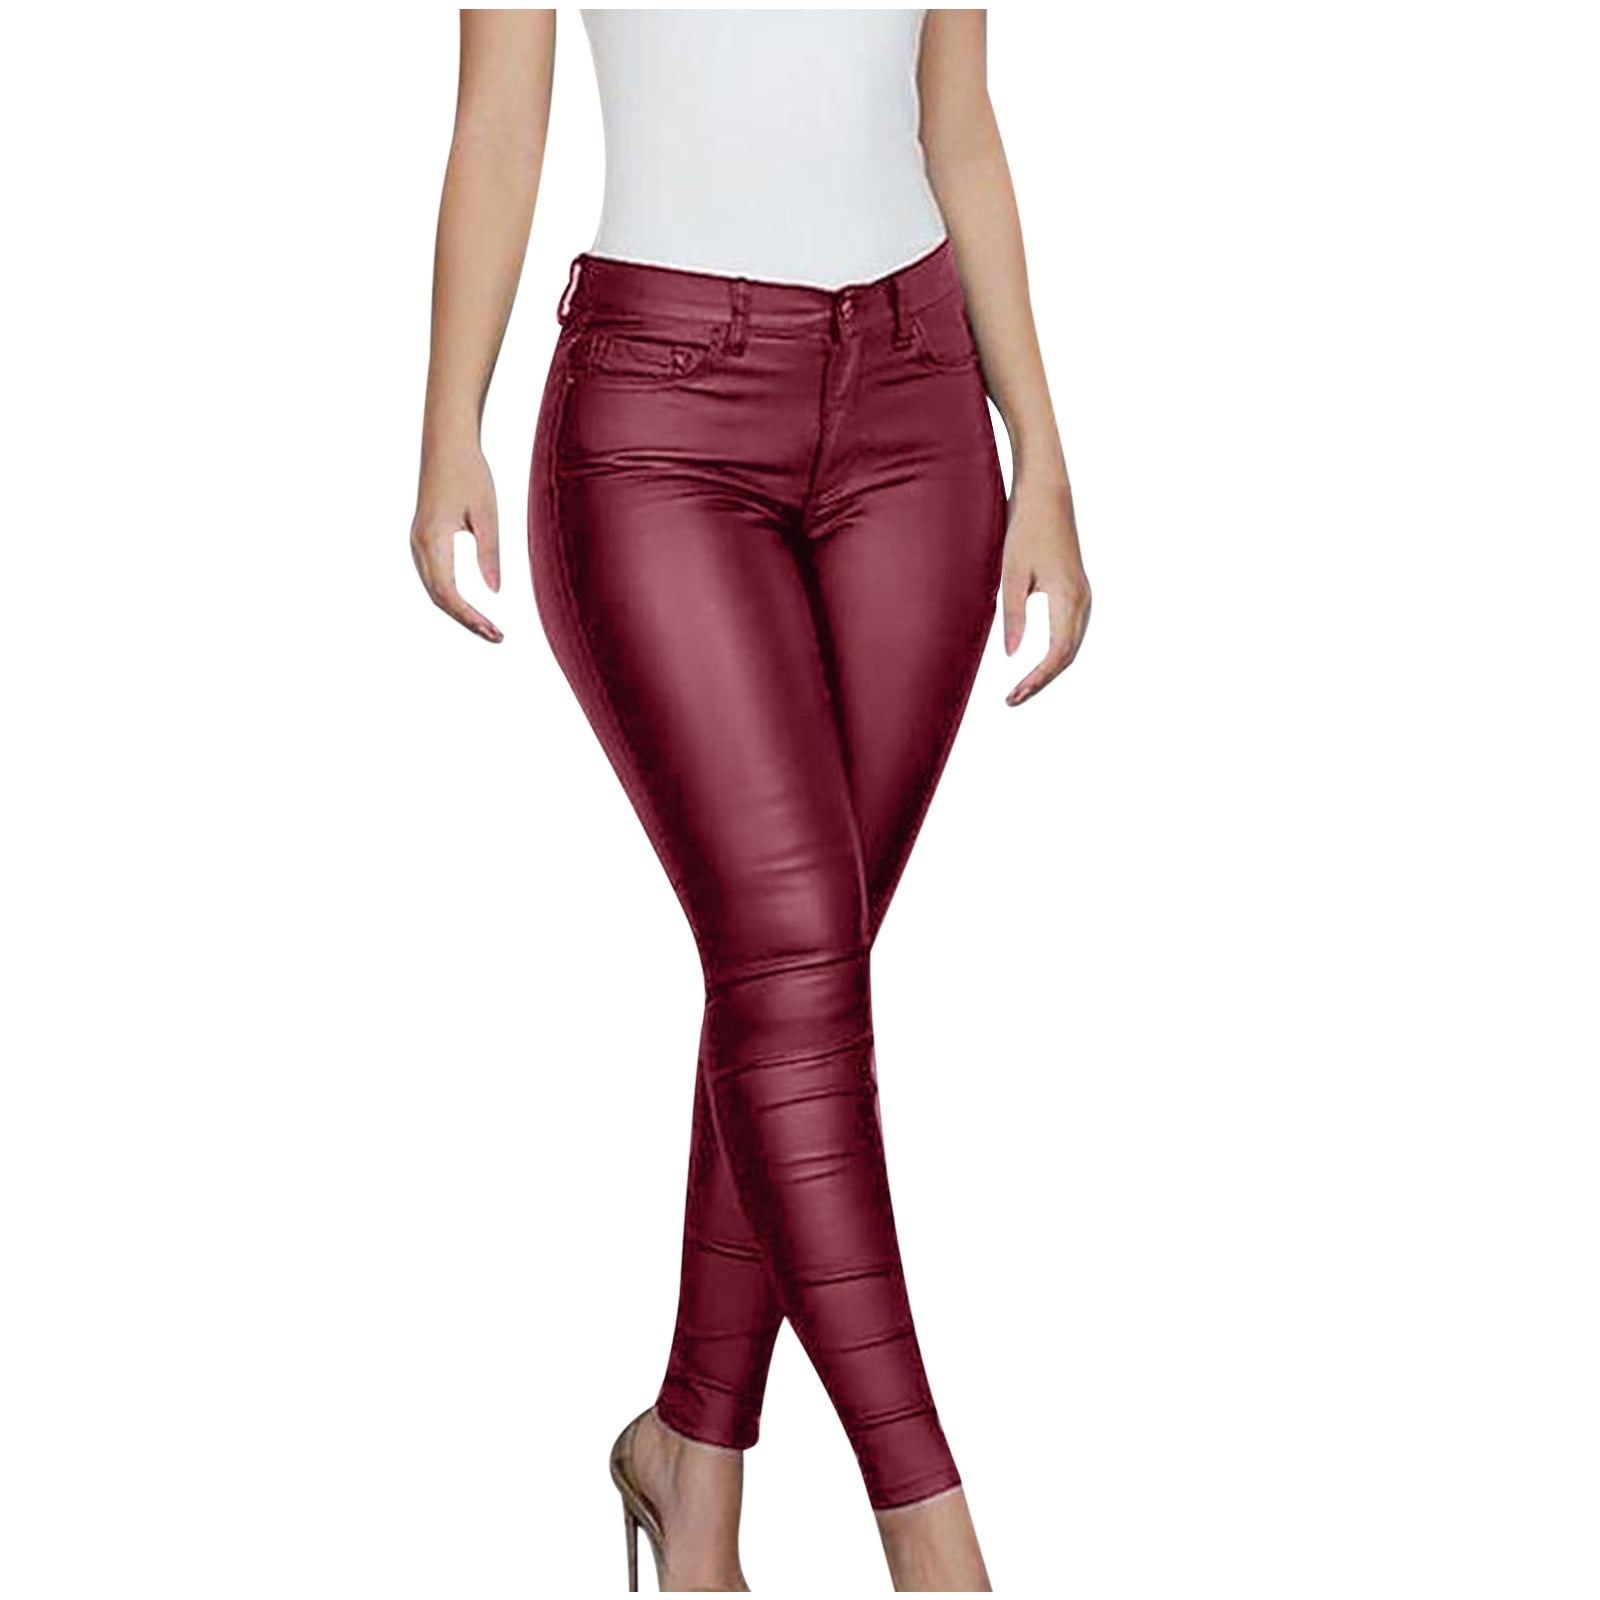 YYDGH Women's Faux Leather Skinny Pants Button Front High Waisted PU  Leather Leggings Pants Wine Red L